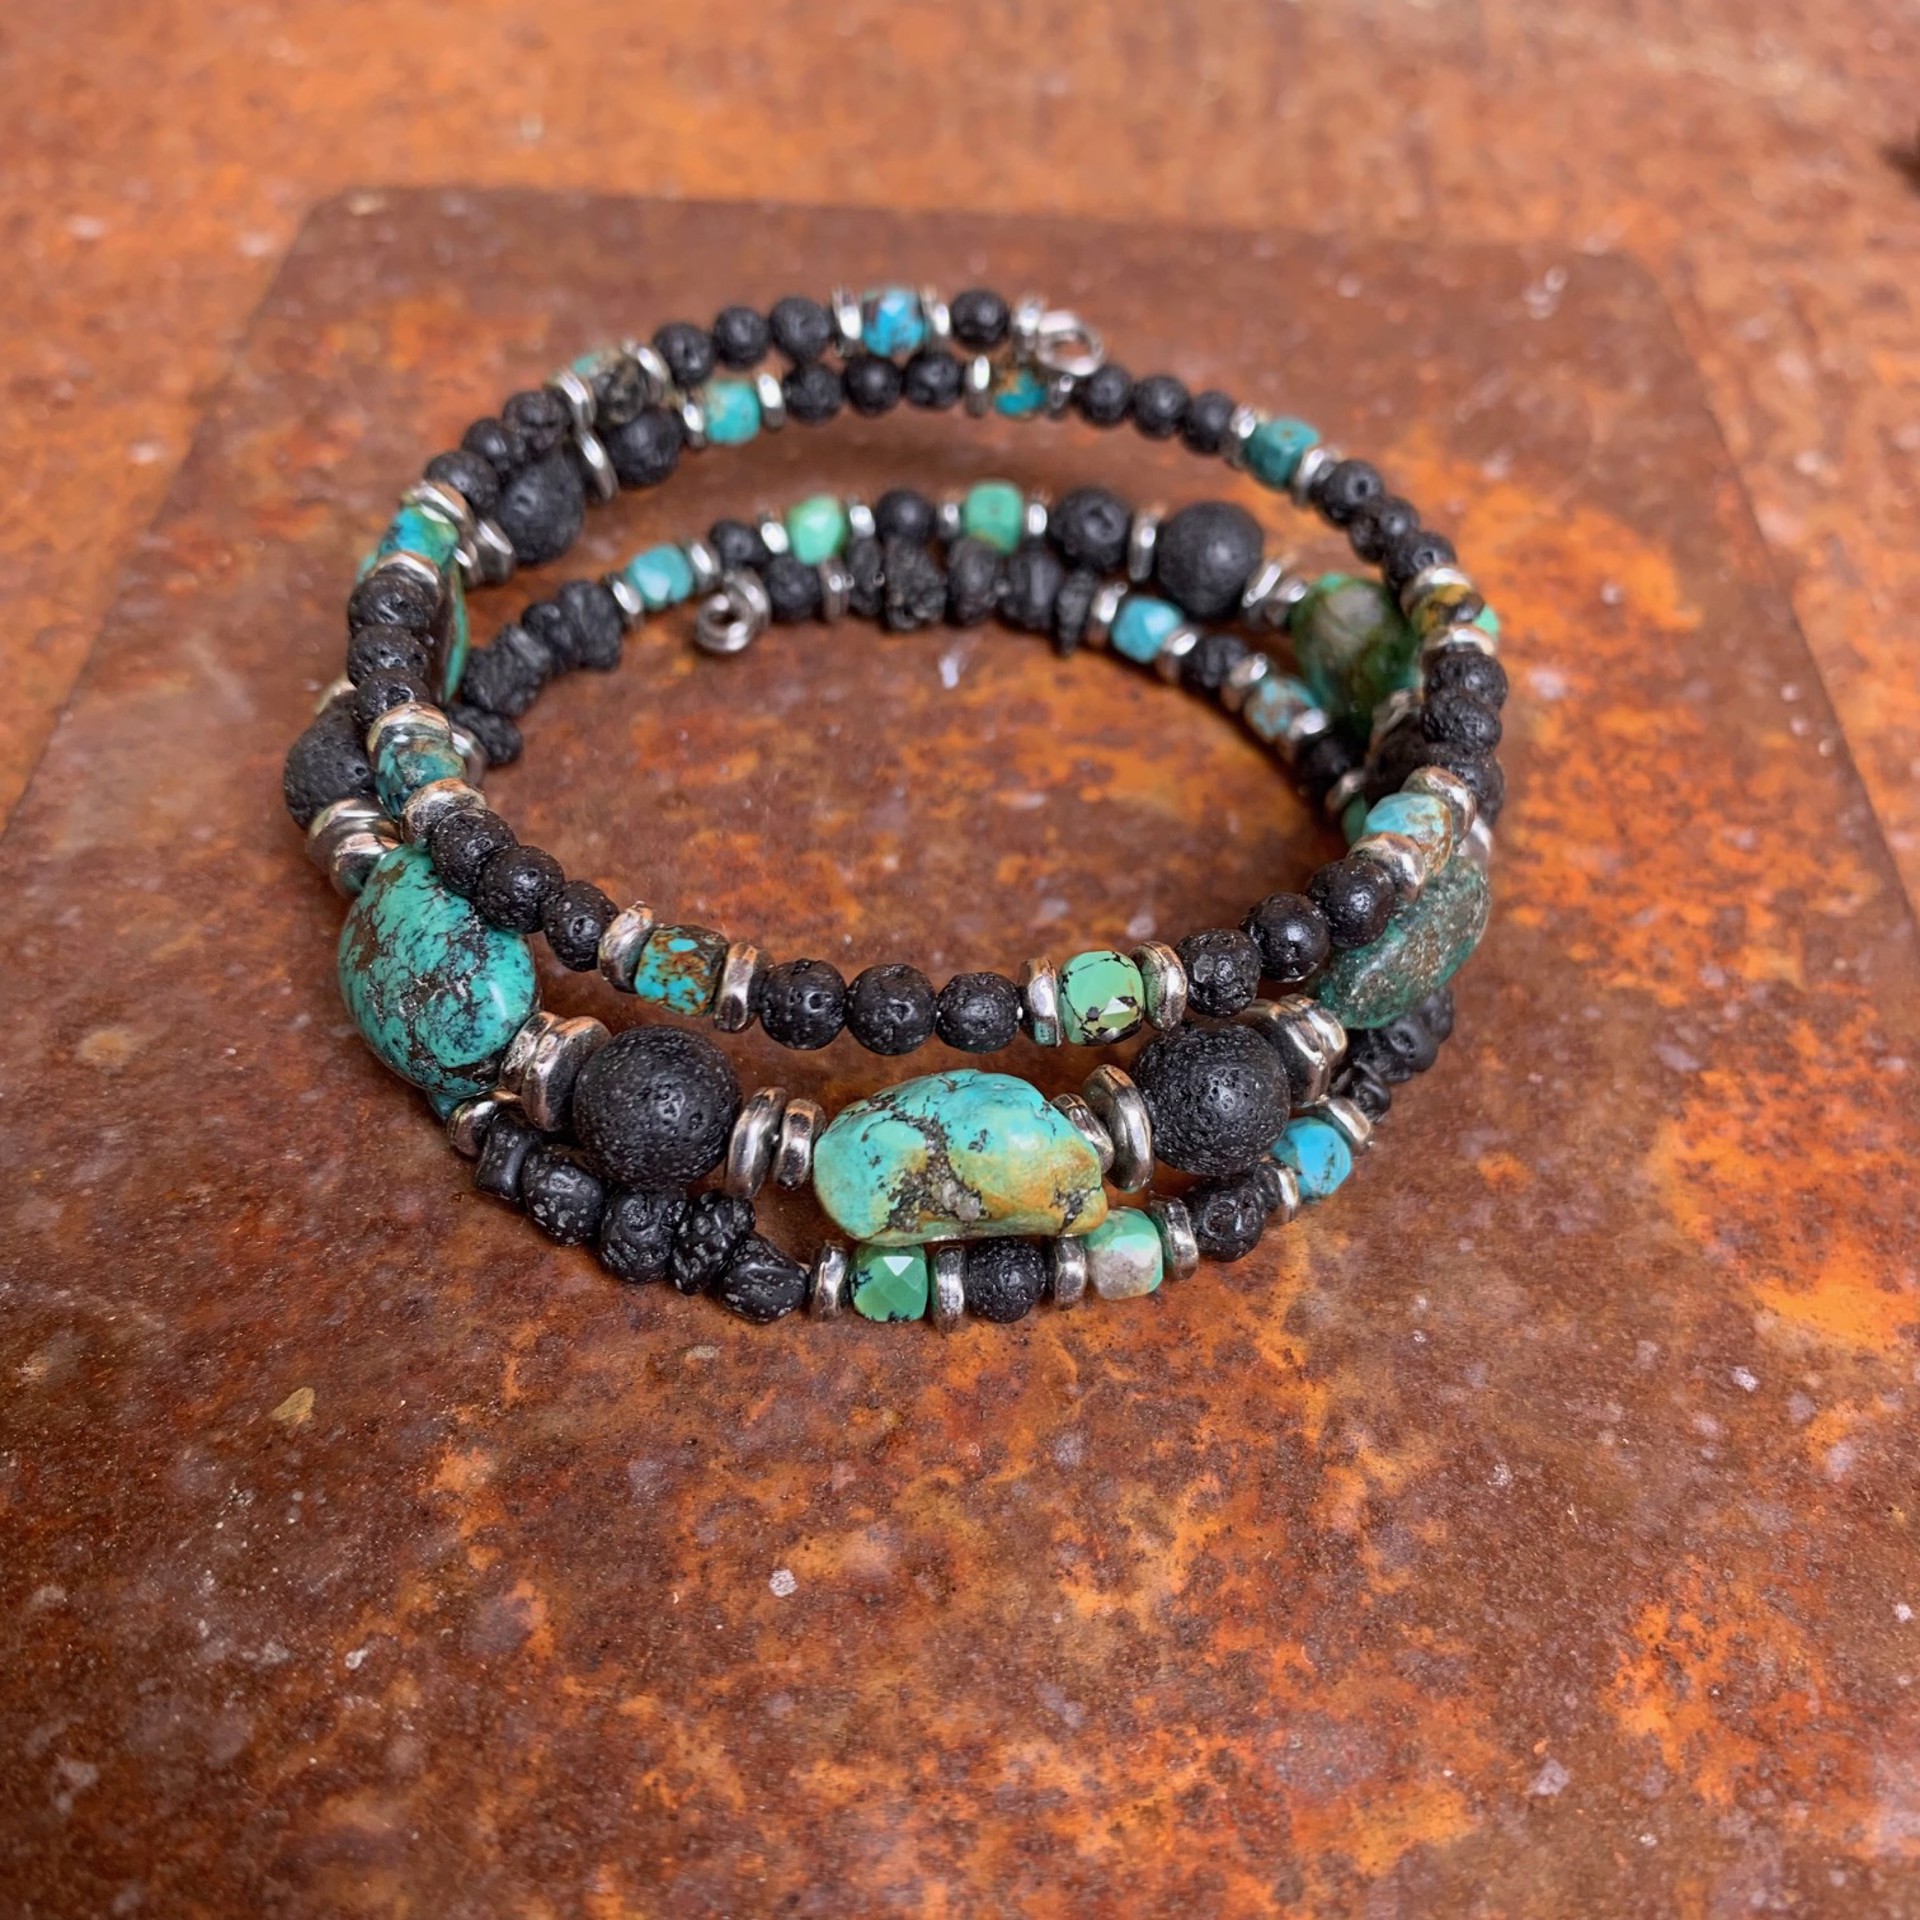 K741 Turquoise and Lava Triple Wrap Bracelet by Kelly Ormsby